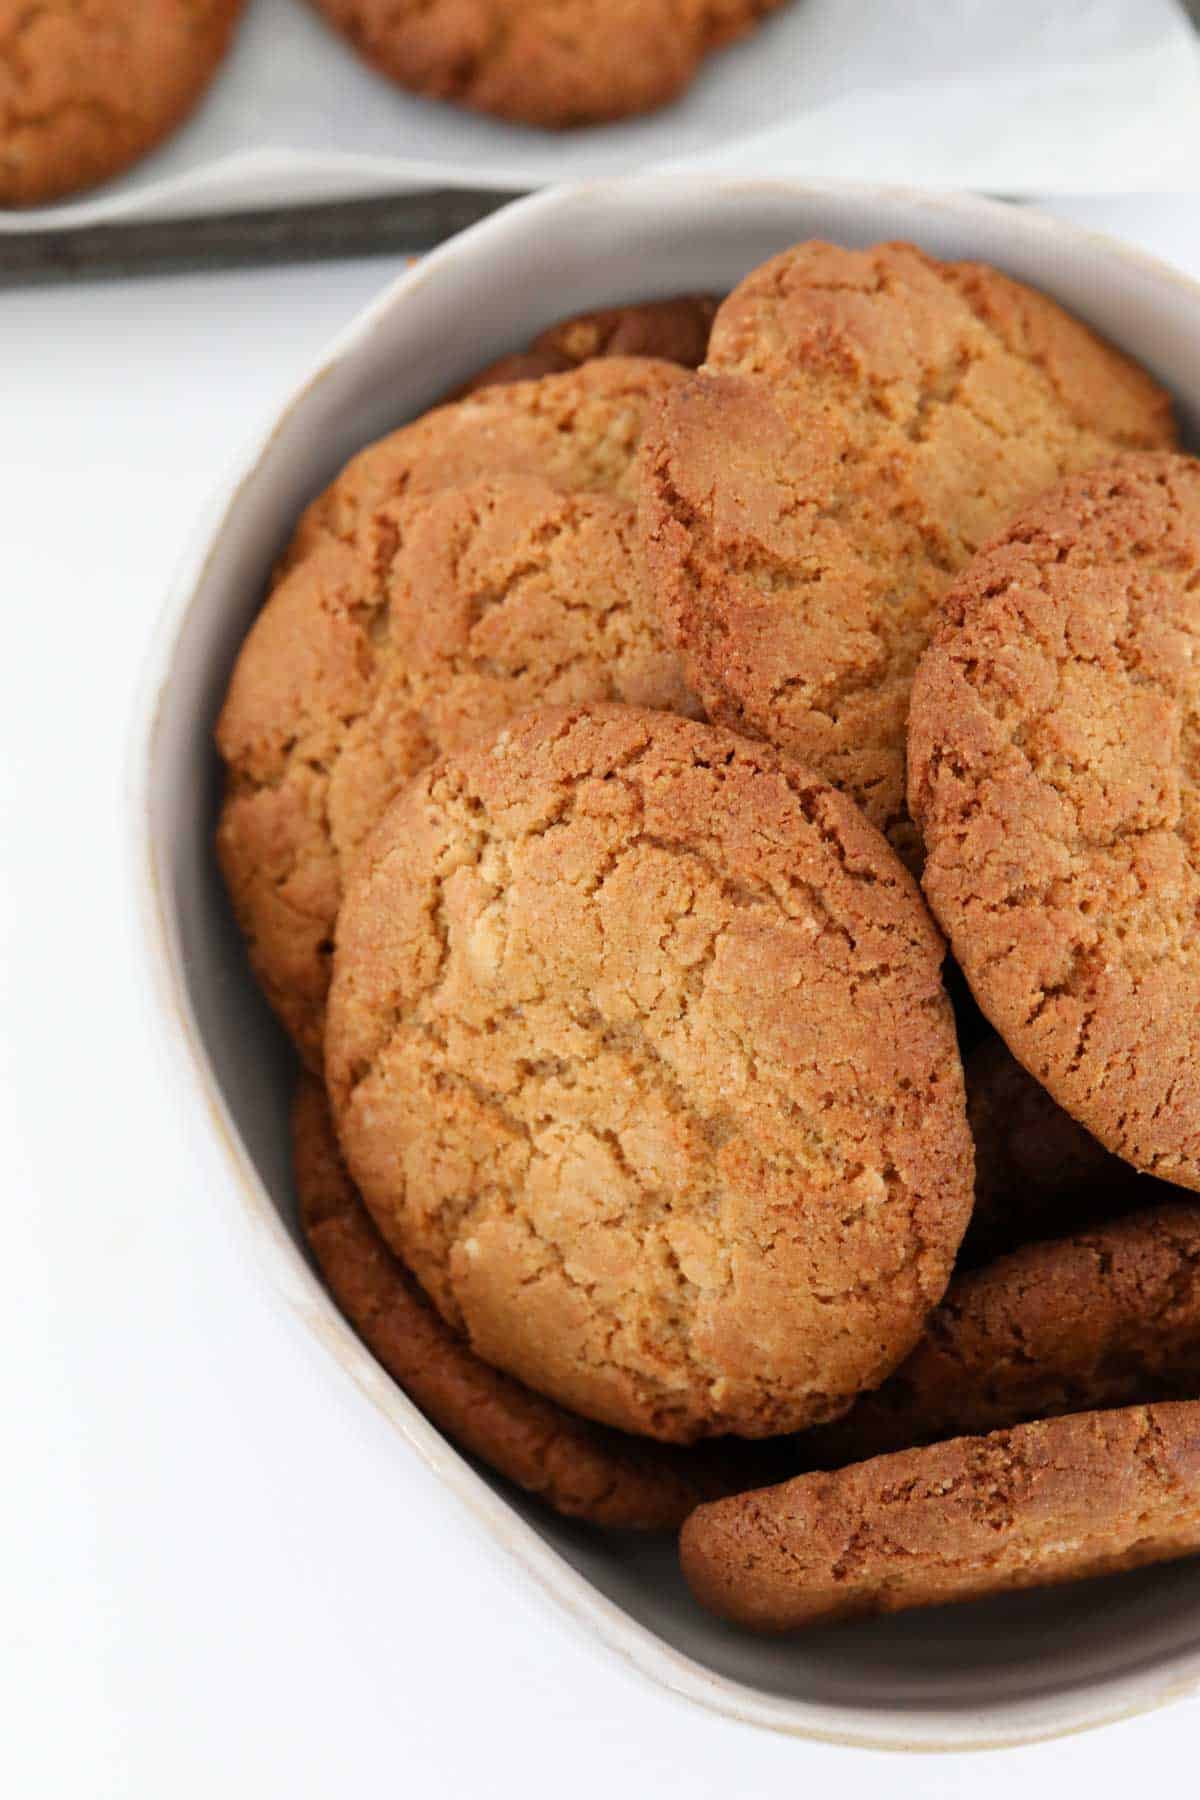 A bowl filled with crunchy ginger biscuits.